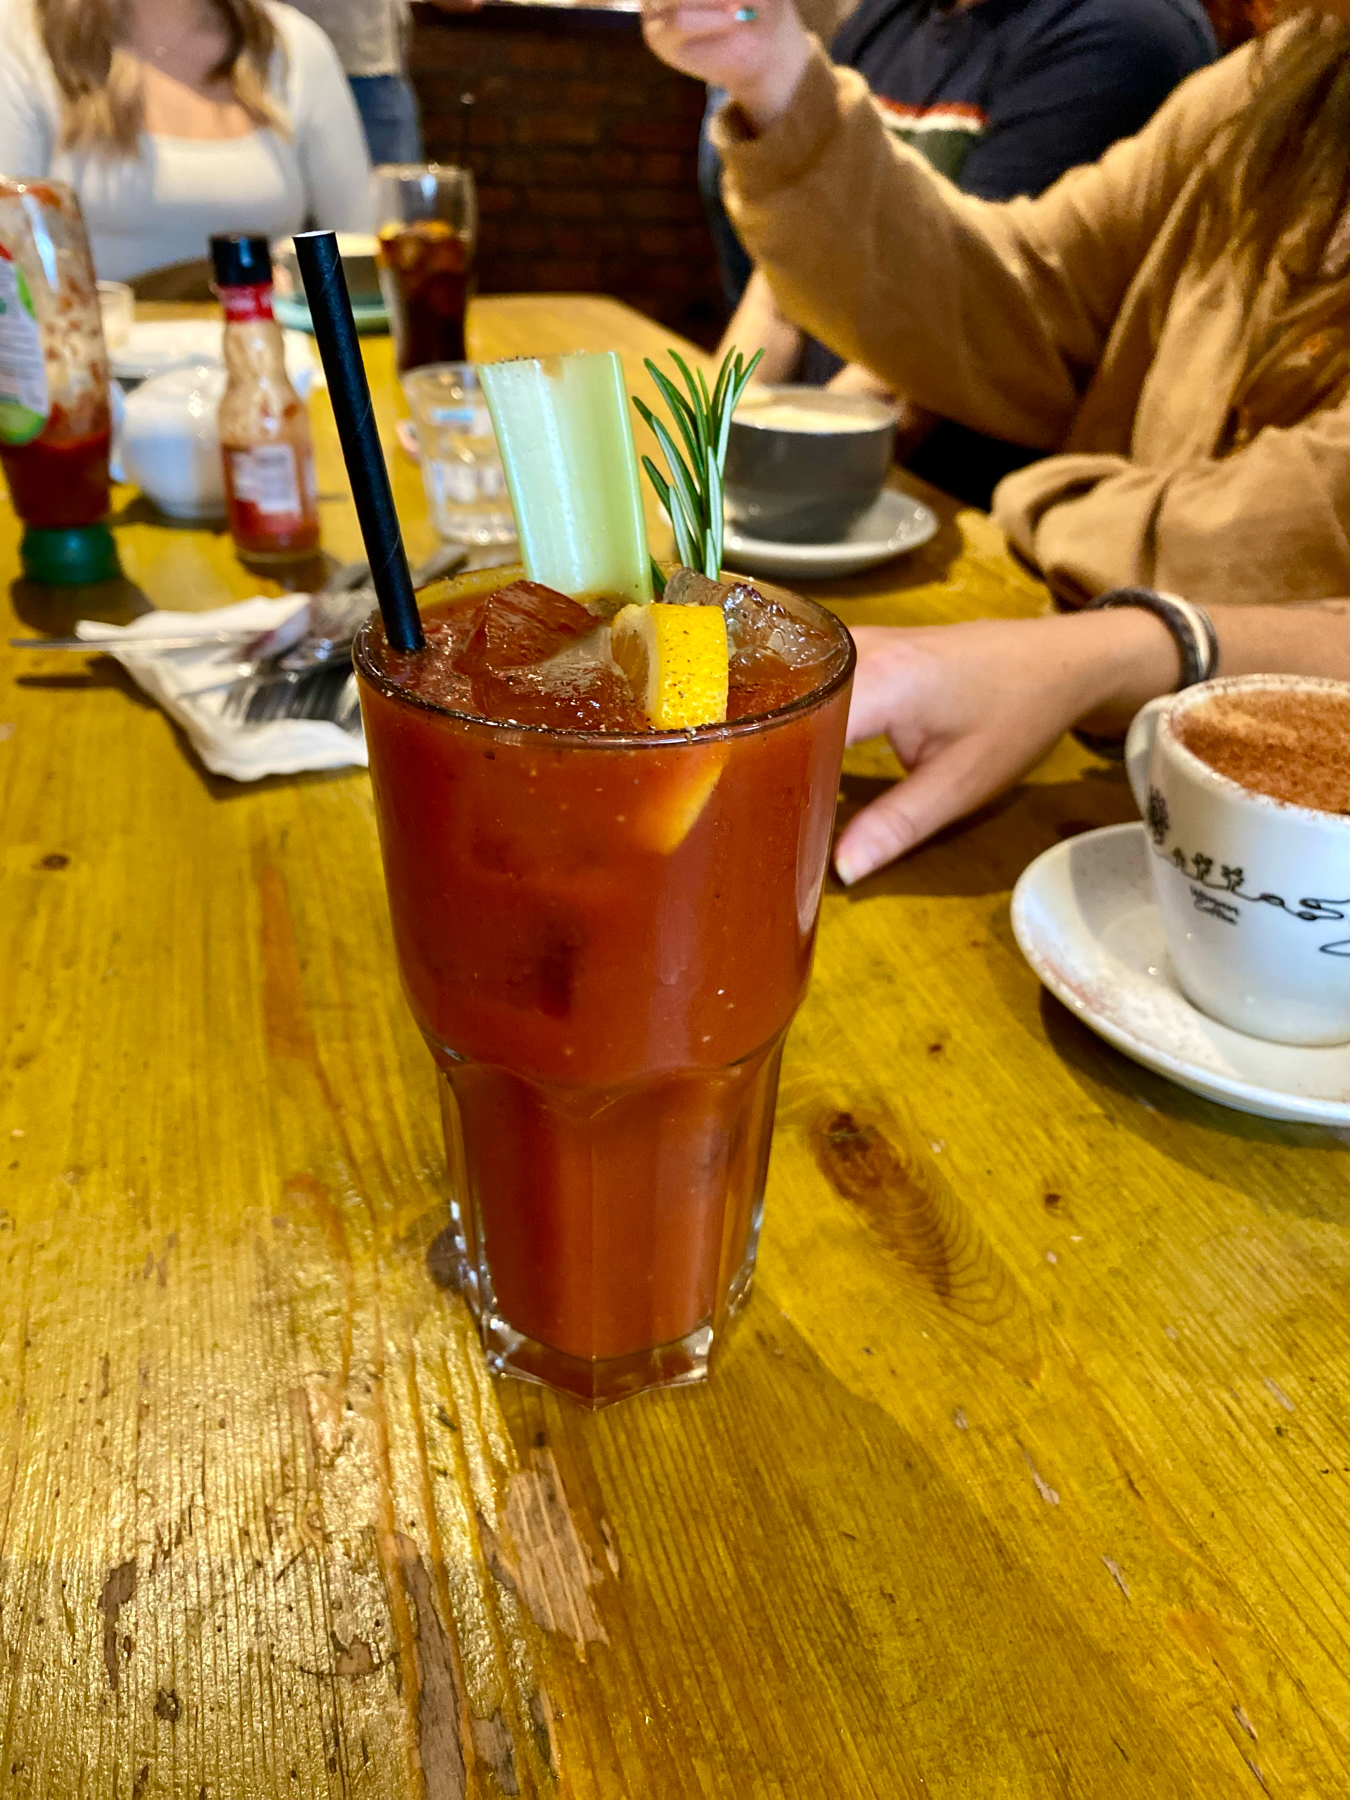 A Bloody Mary cocktail on a wooden table, garnished with celery, lemon and rosemary, with people and beverages in the background.